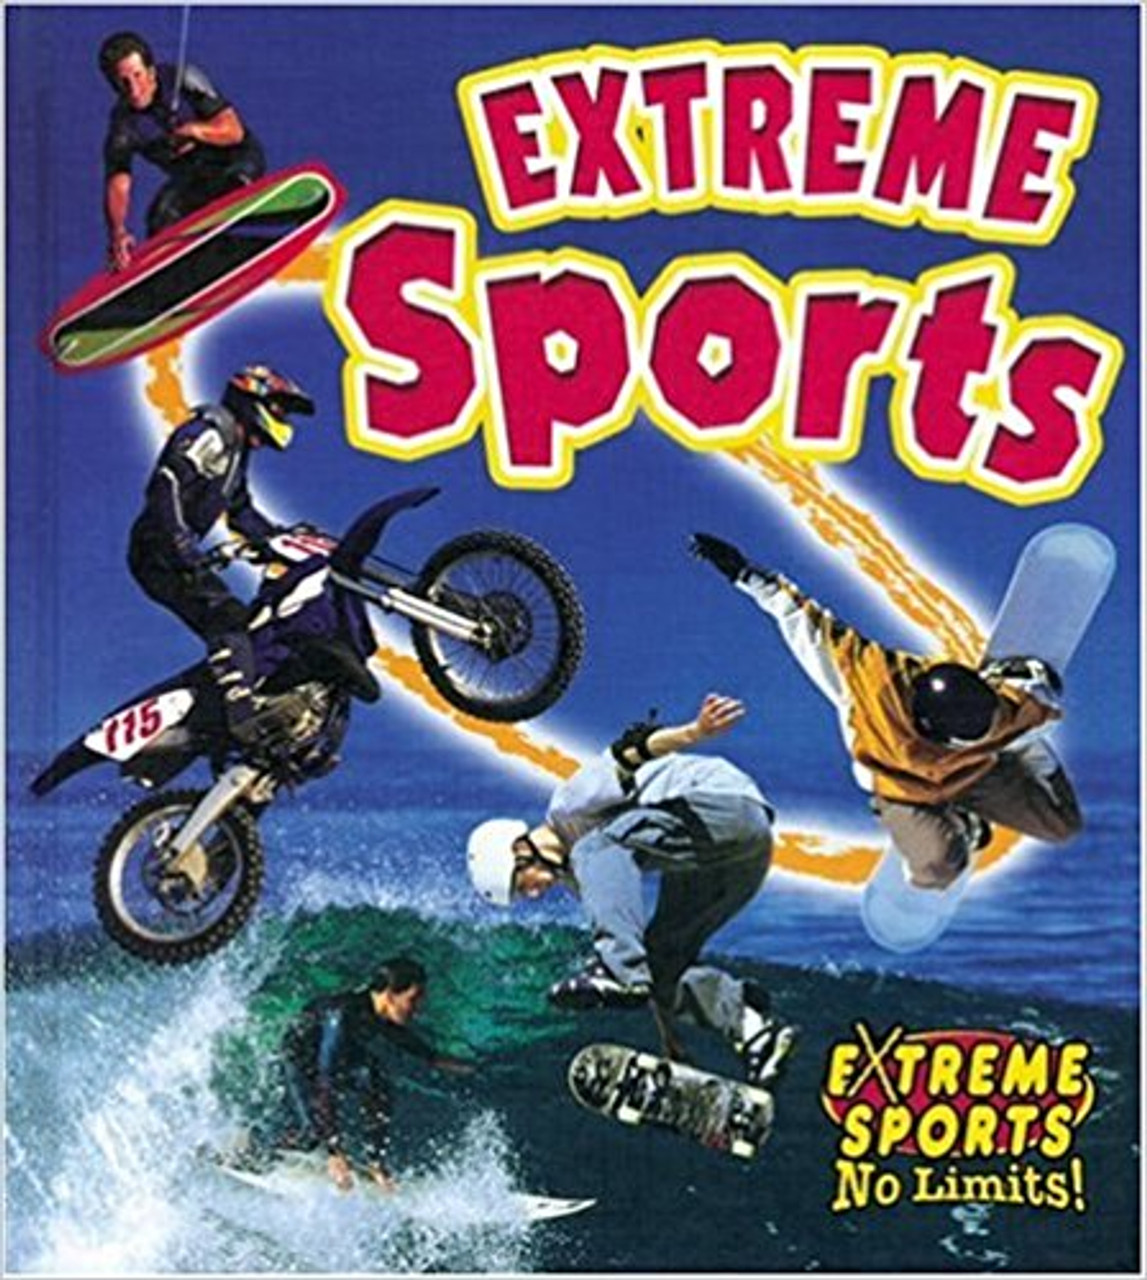 Extreme Sports (Paperback) by John Crossingham